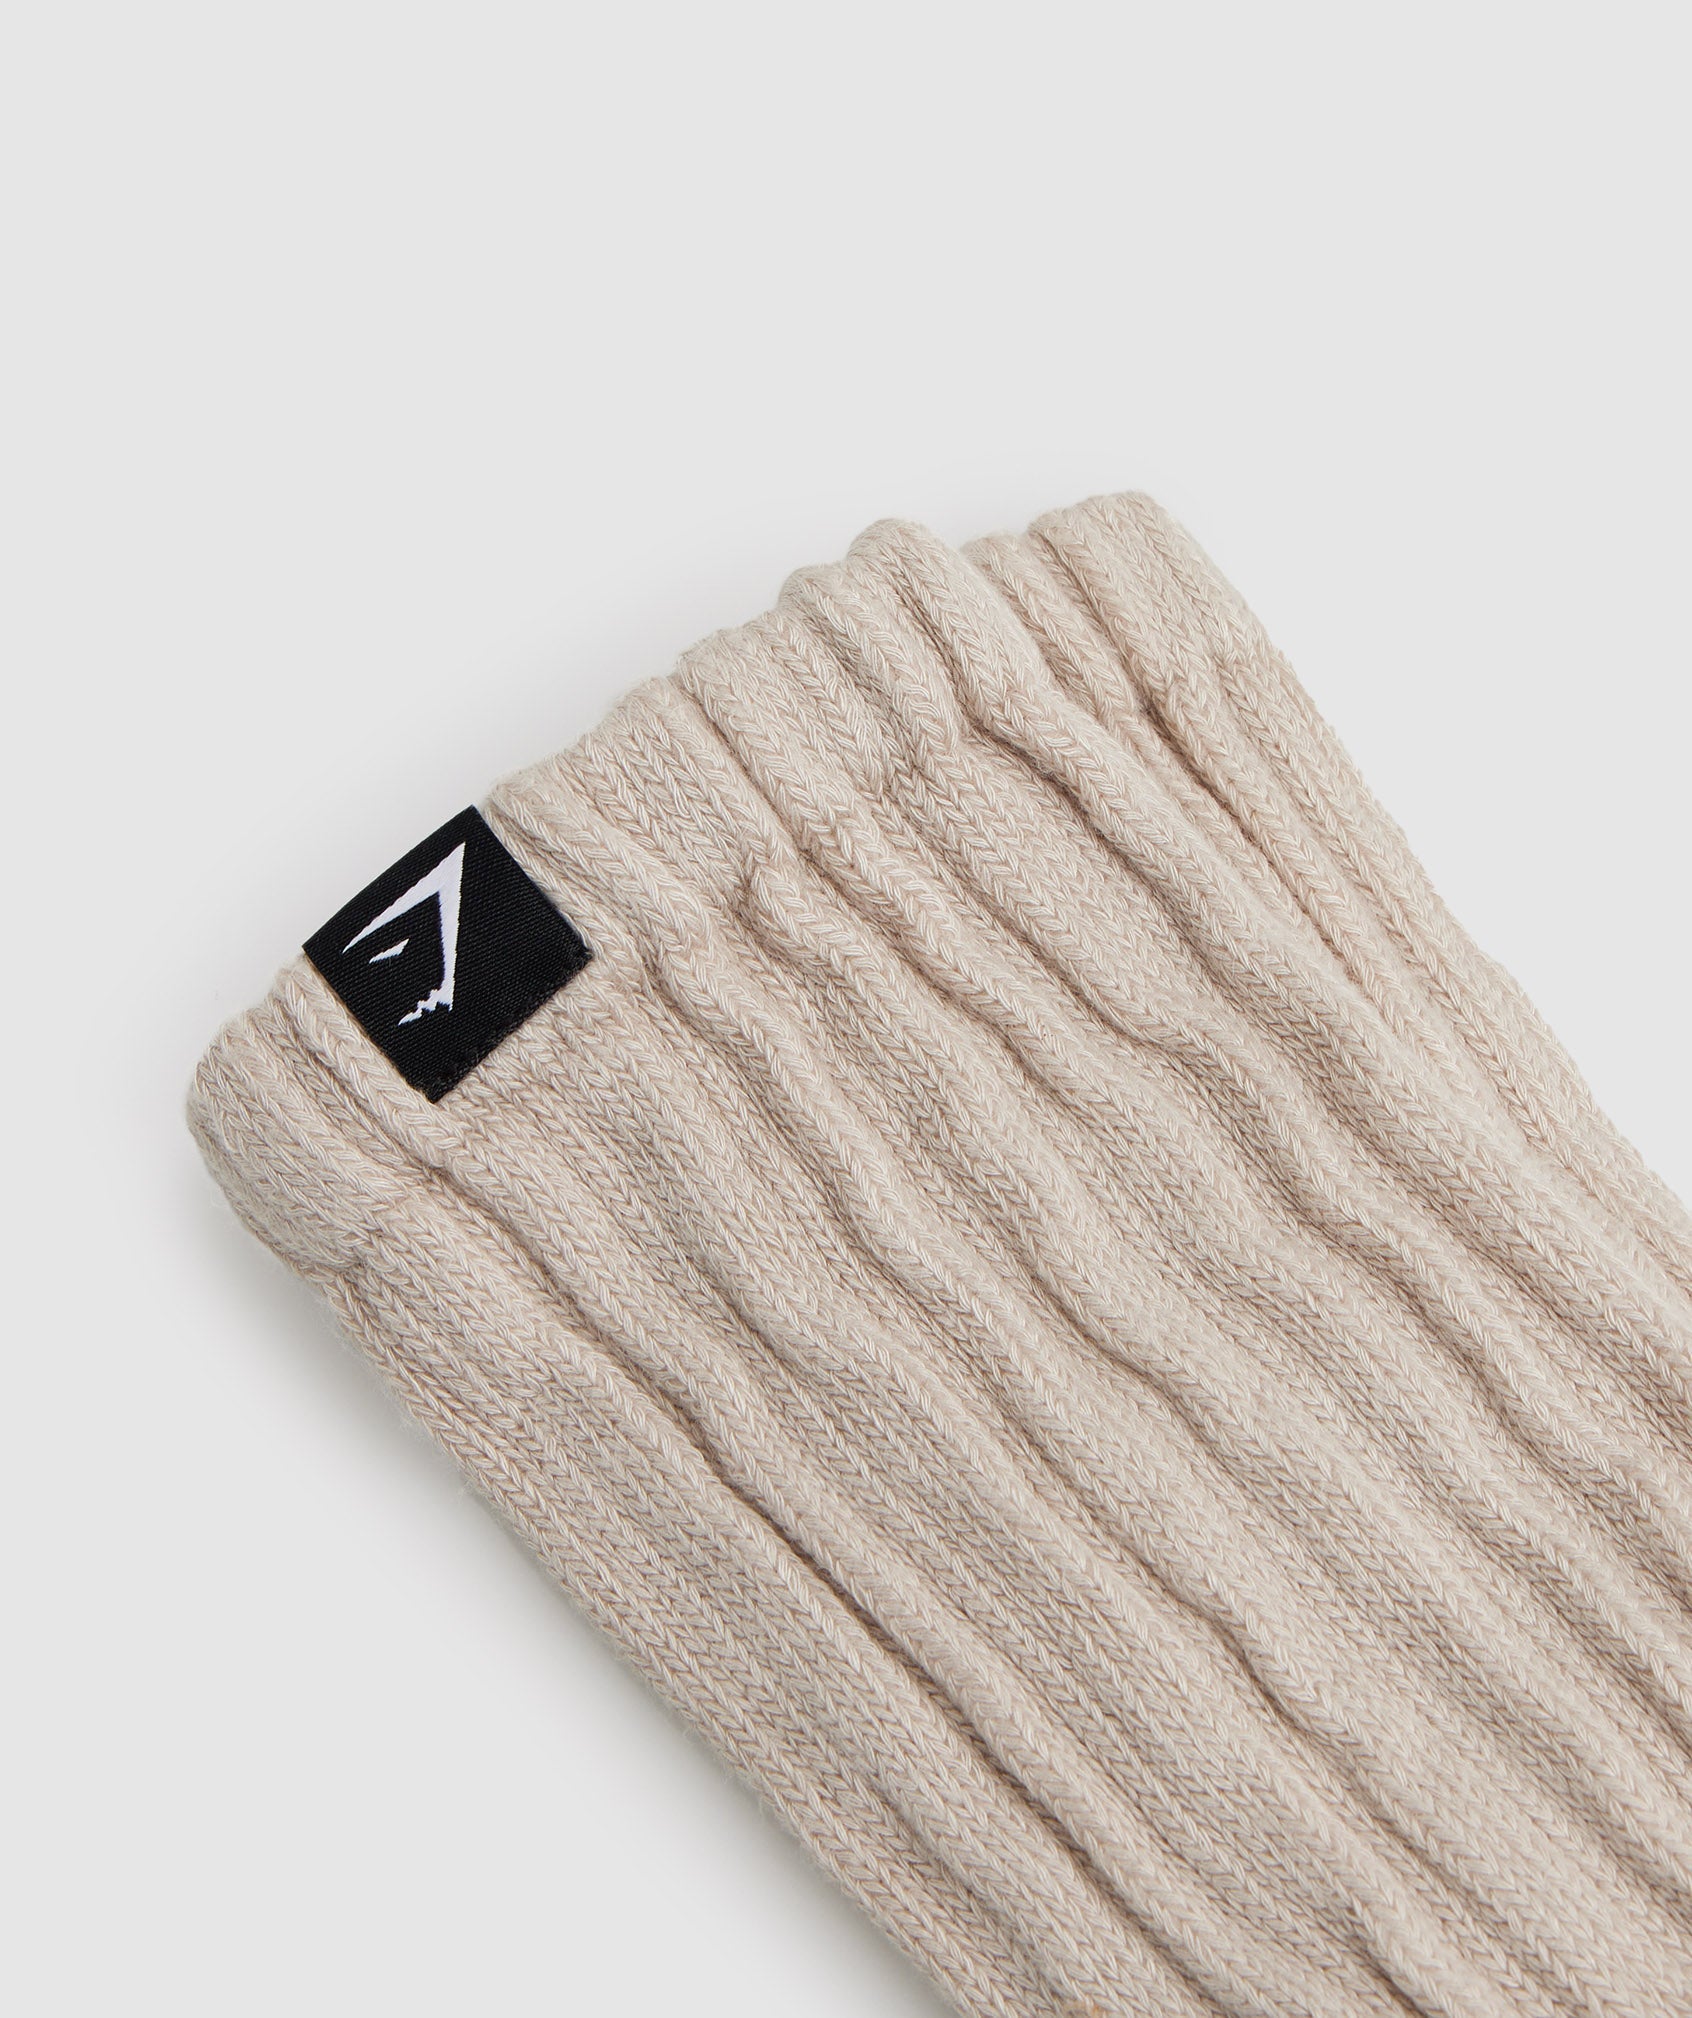 Comfy Rest Day Socks in Pebble Grey